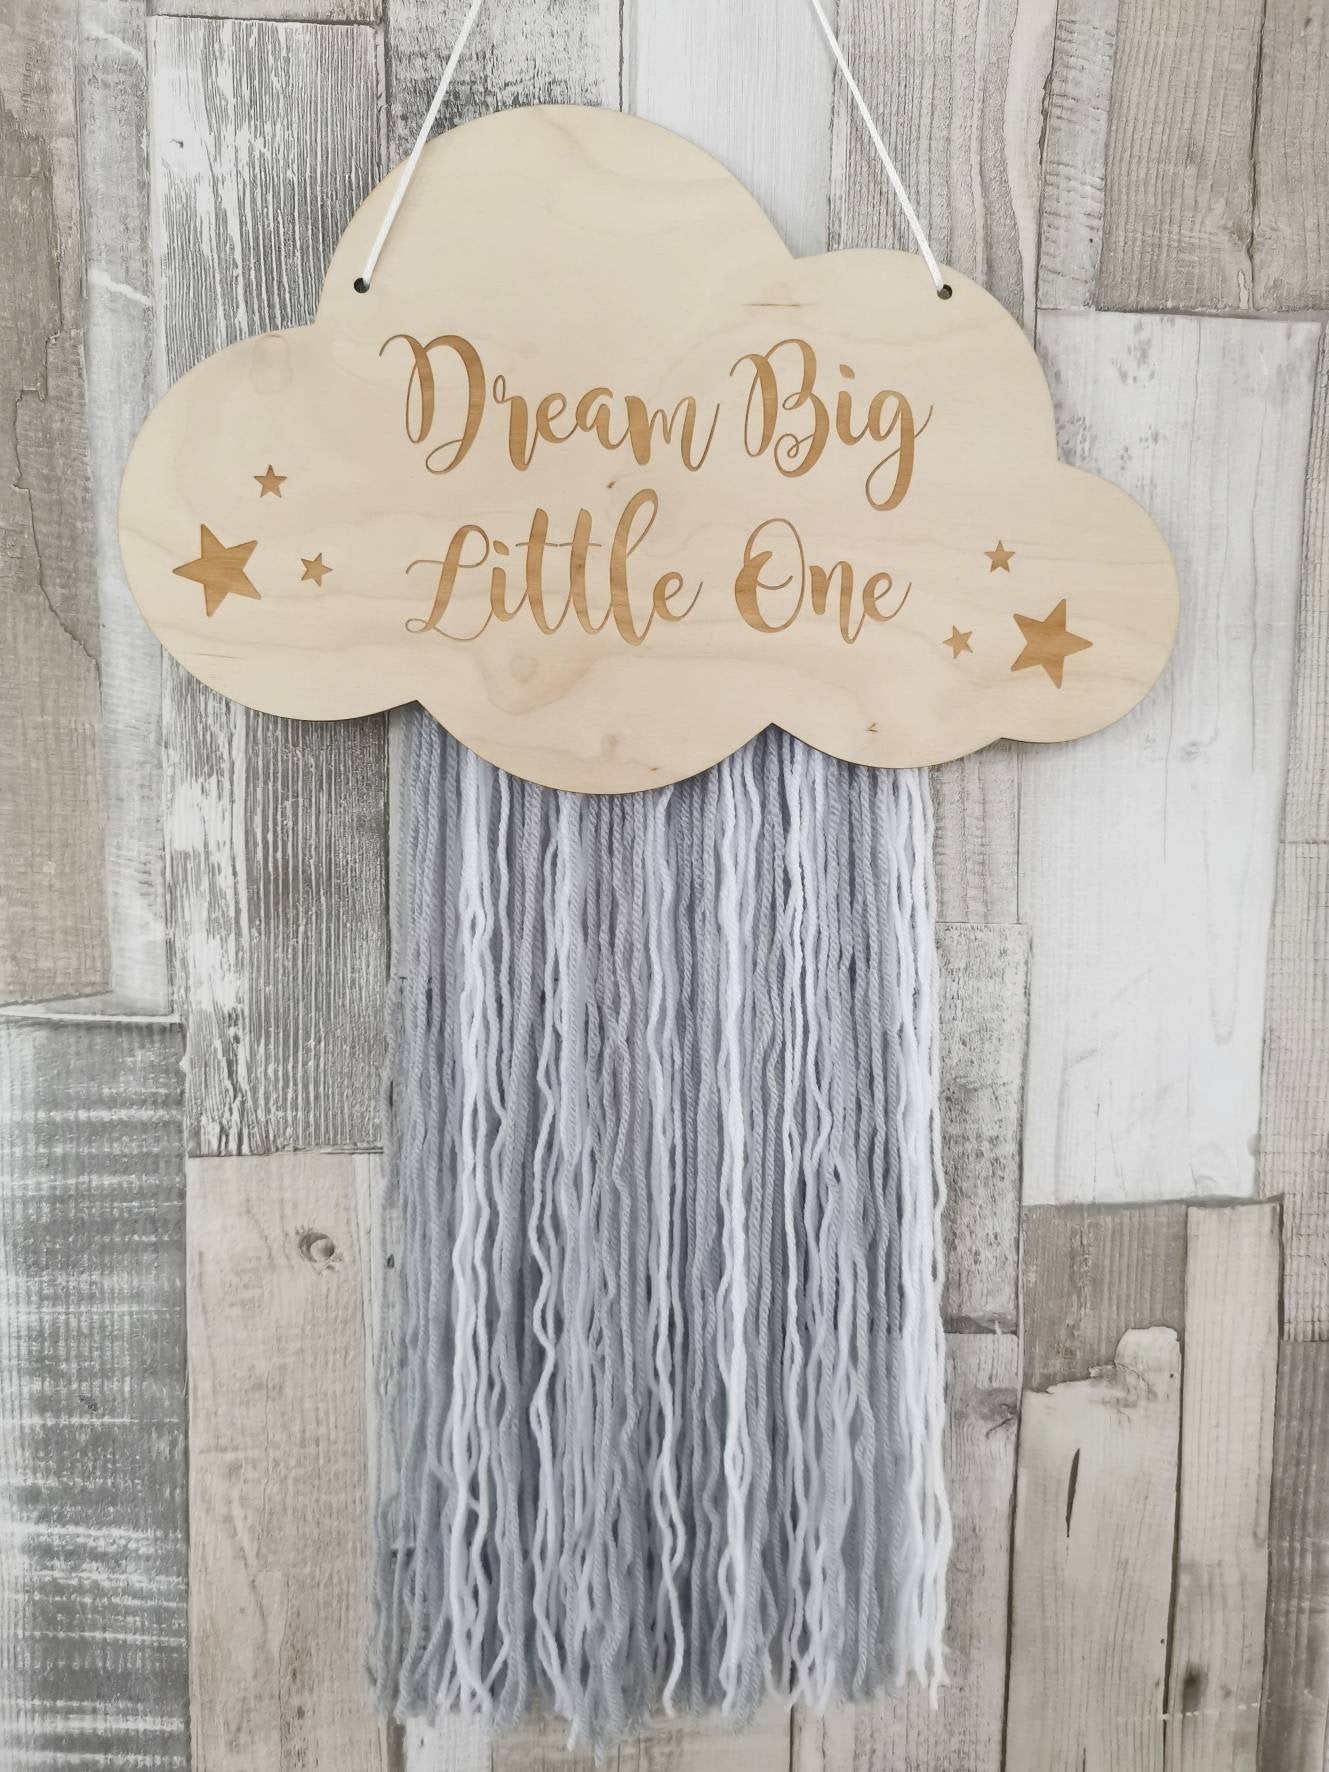 Dream Big Little One Engraved Cloud Wall Hanger - Grey & White